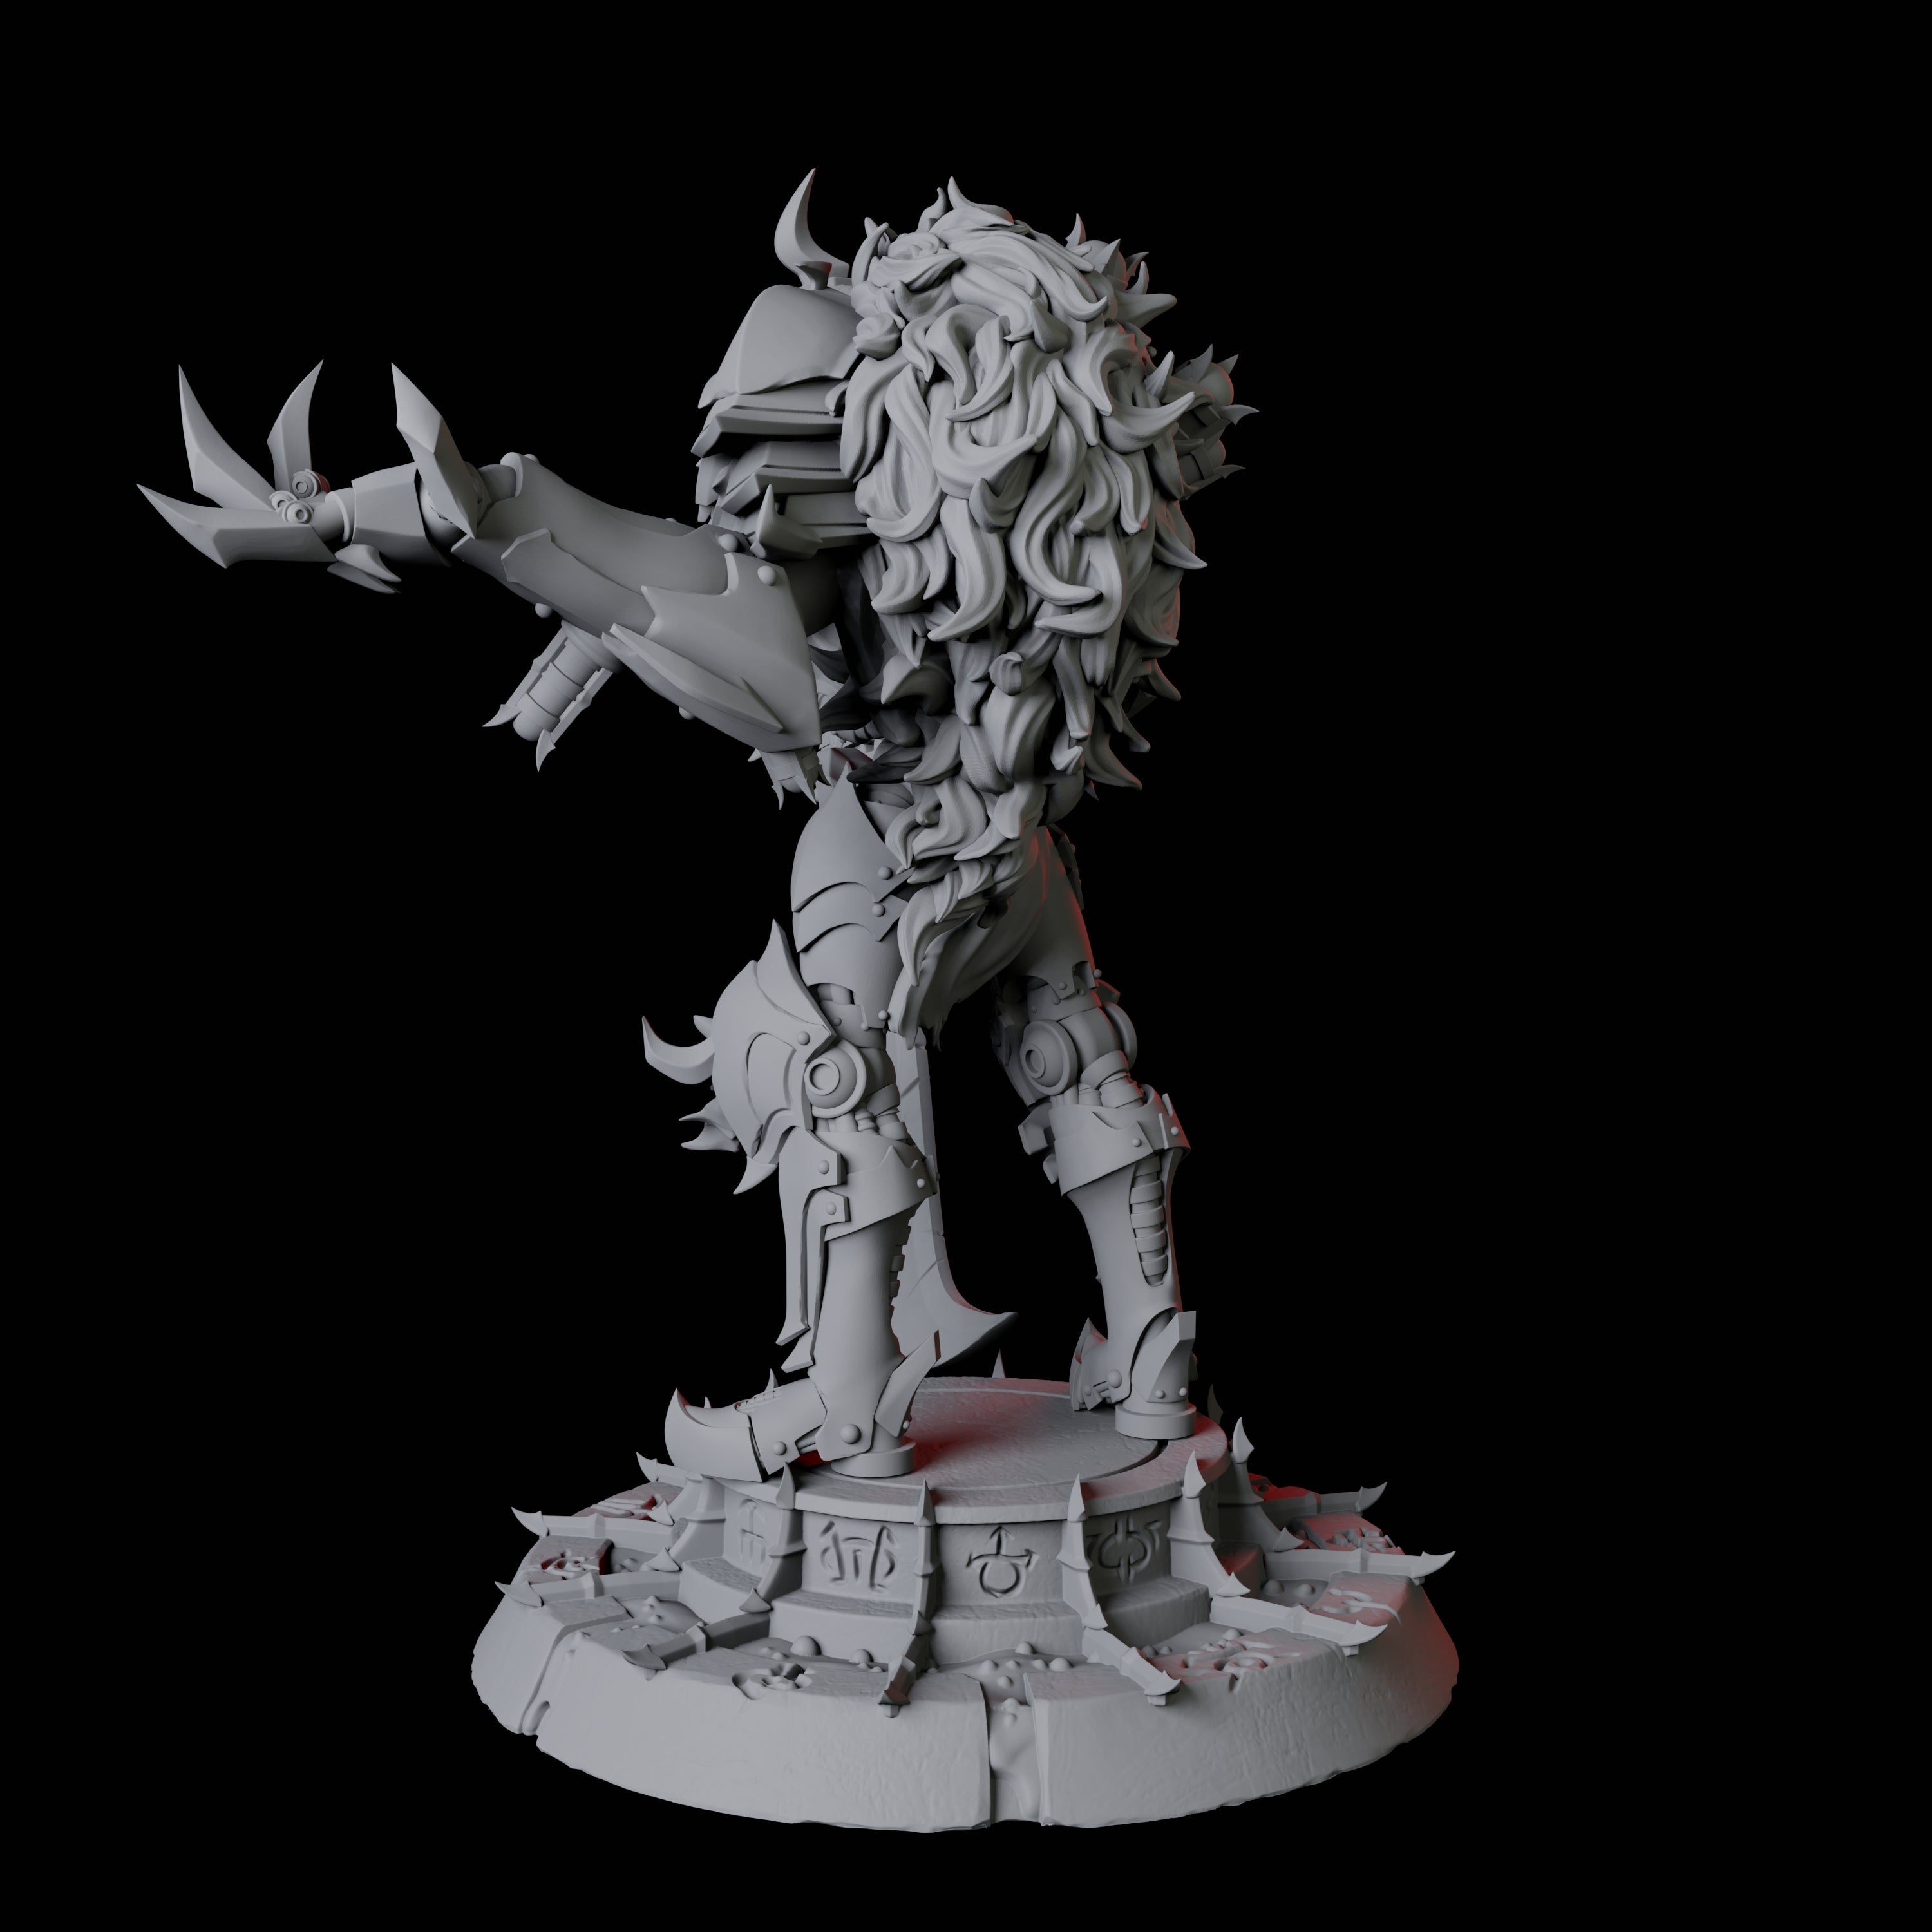 Gleaming Clockwork Soldier Miniature for Dungeons and Dragons, Pathfinder or other TTRPGs